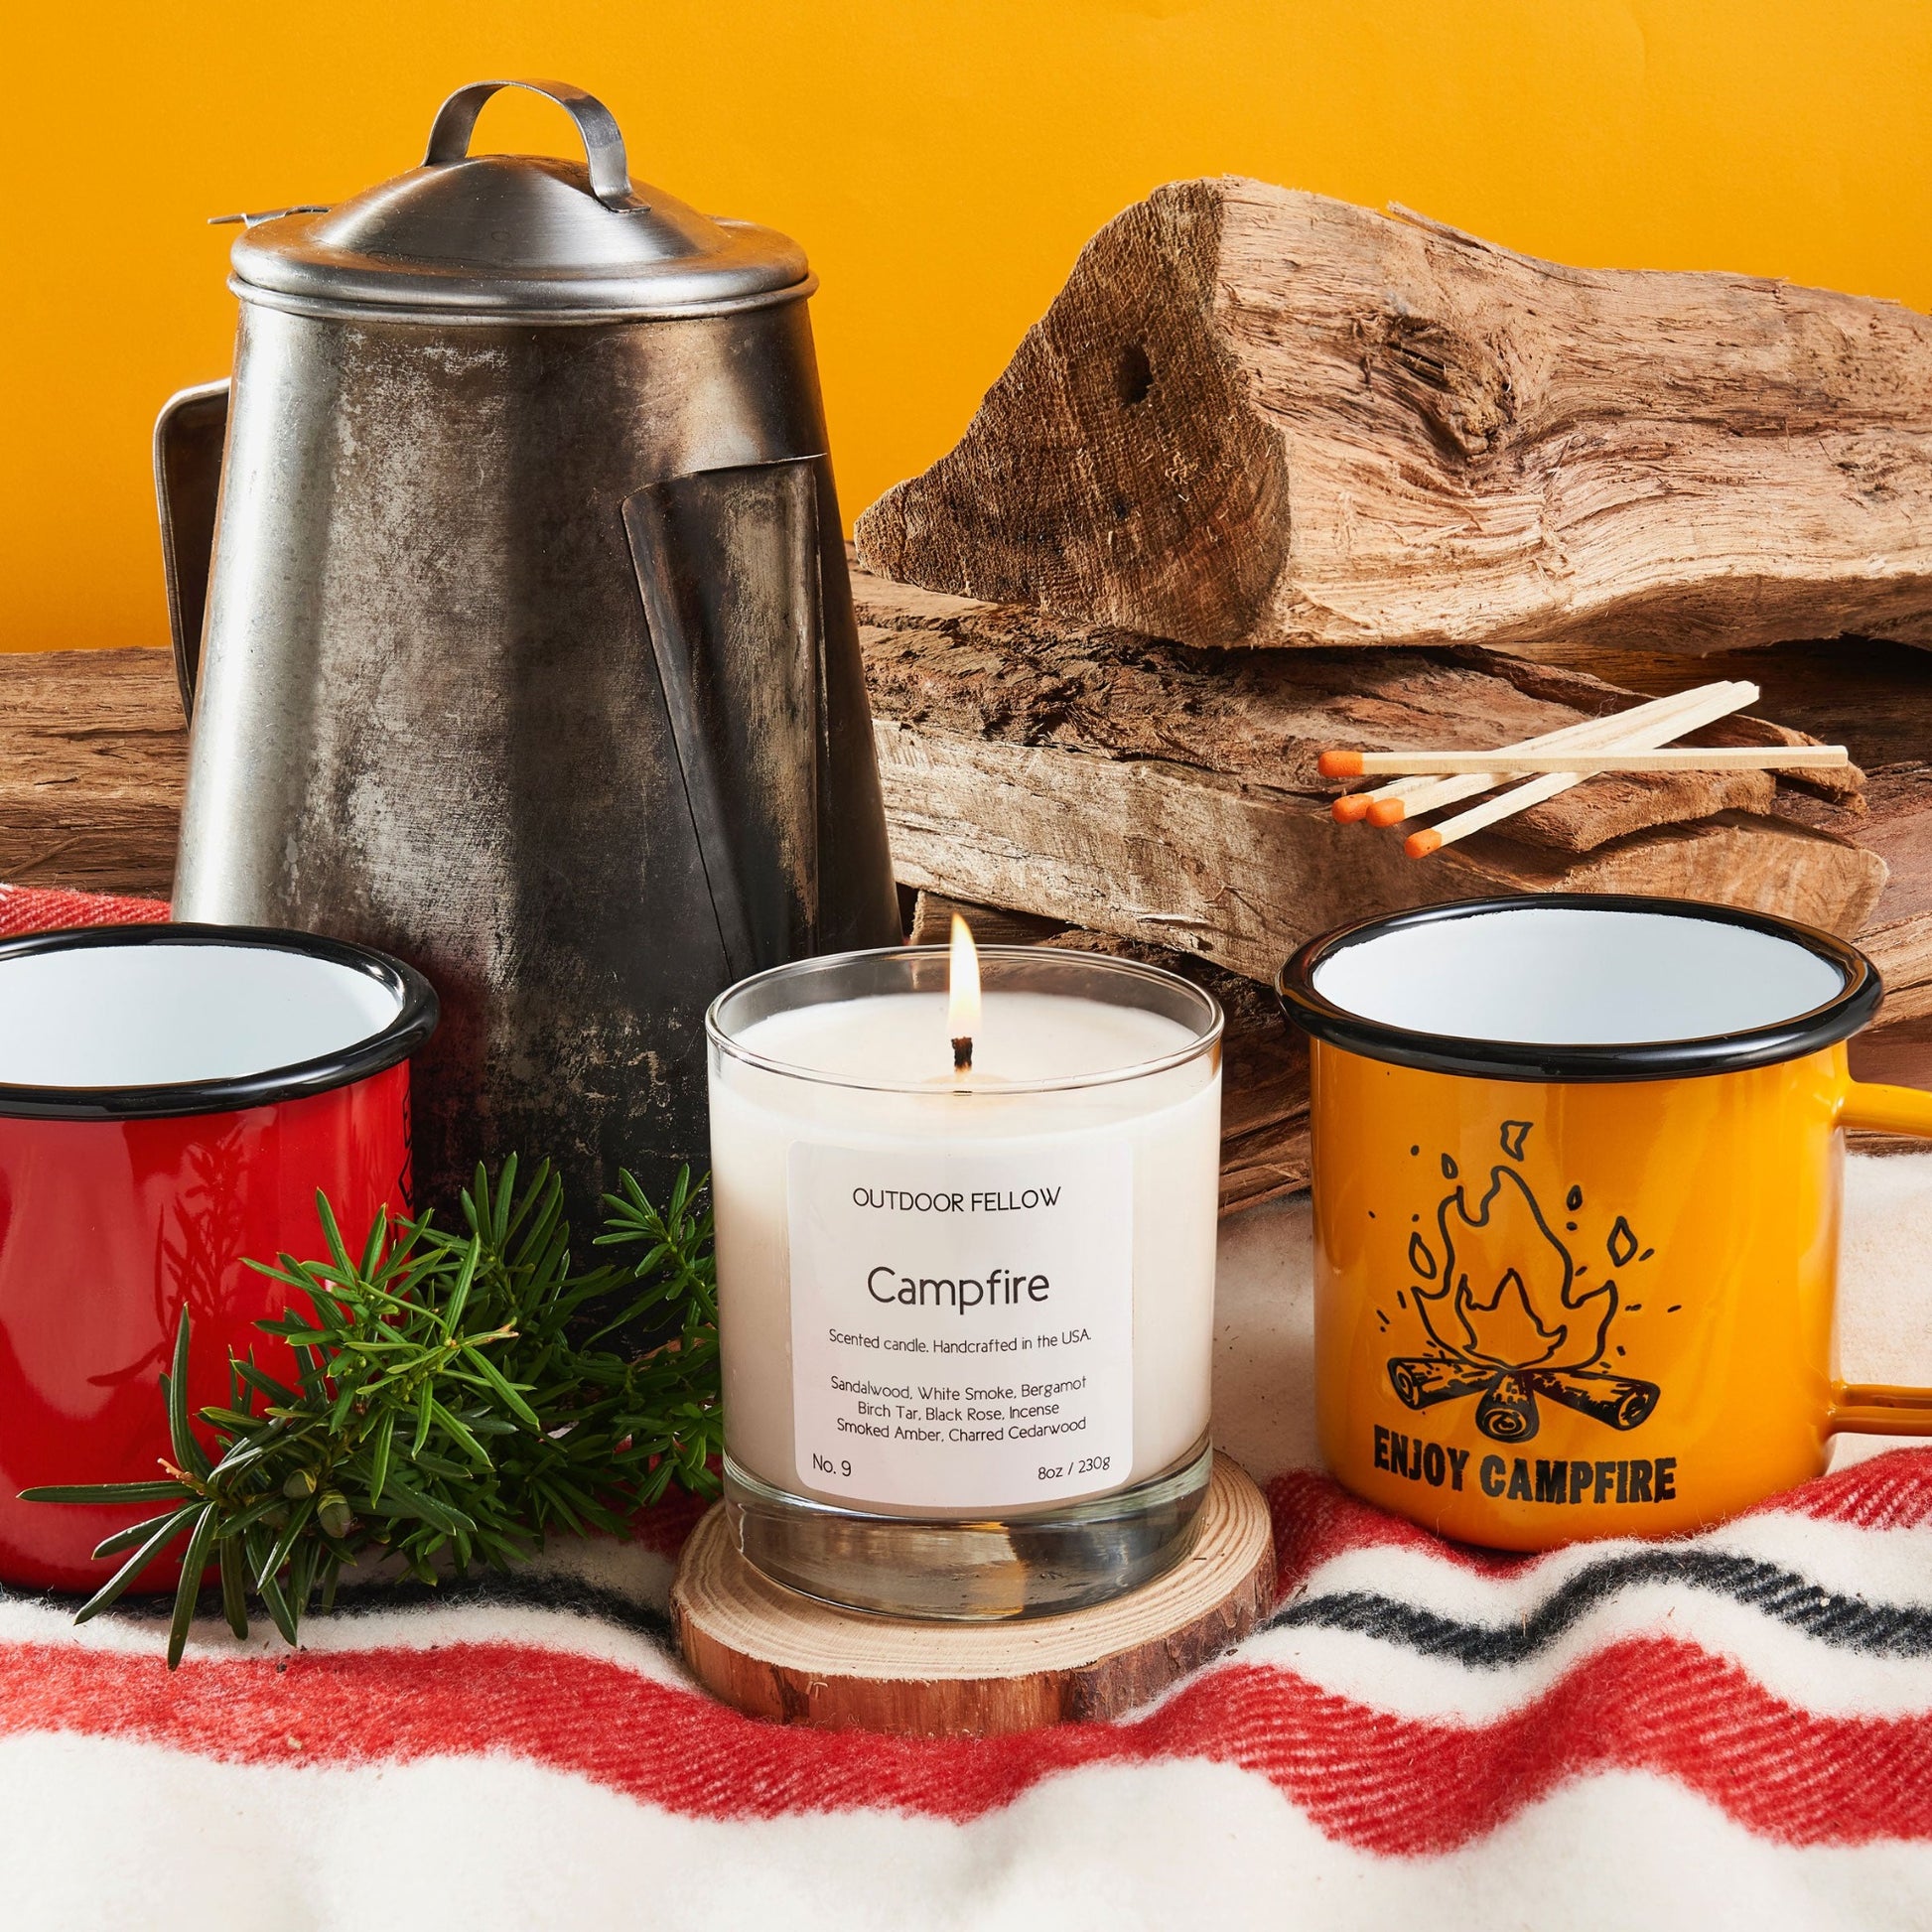 Campfire scented candle next to coffee mugs, stacked wood and a rustic coffee pot